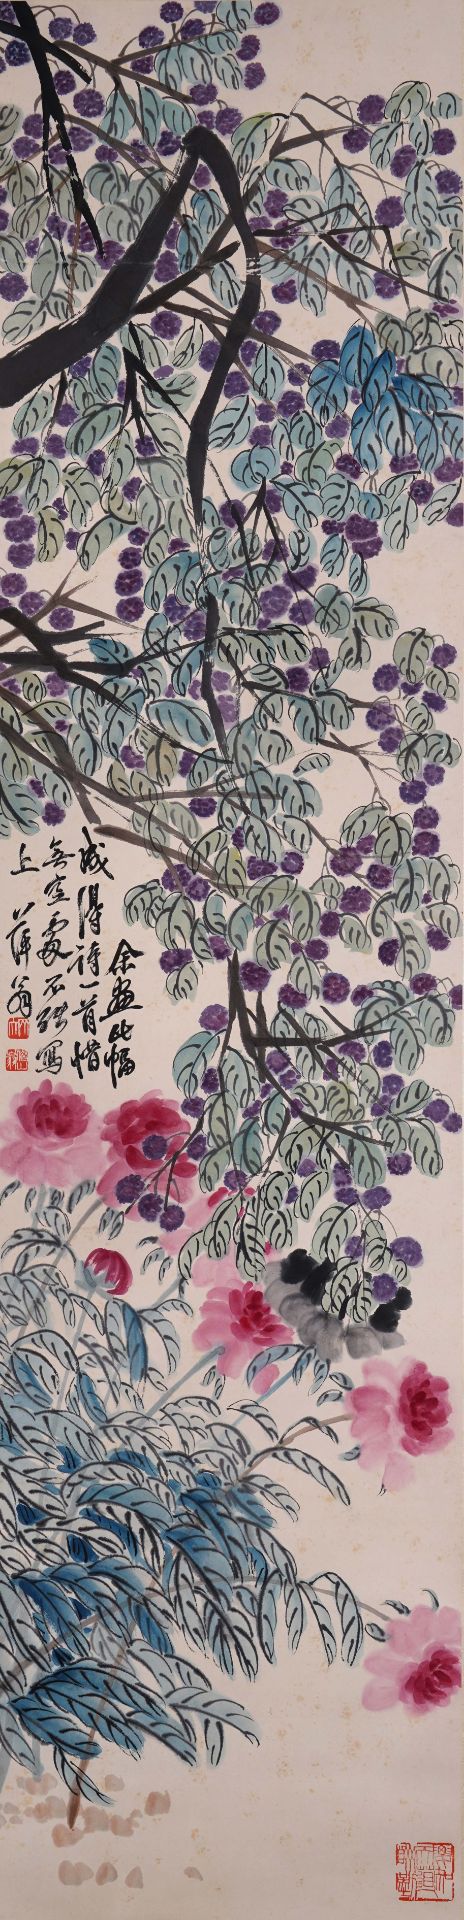 A Chinese Scroll Painting Signed Qi Baishi - Image 5 of 13